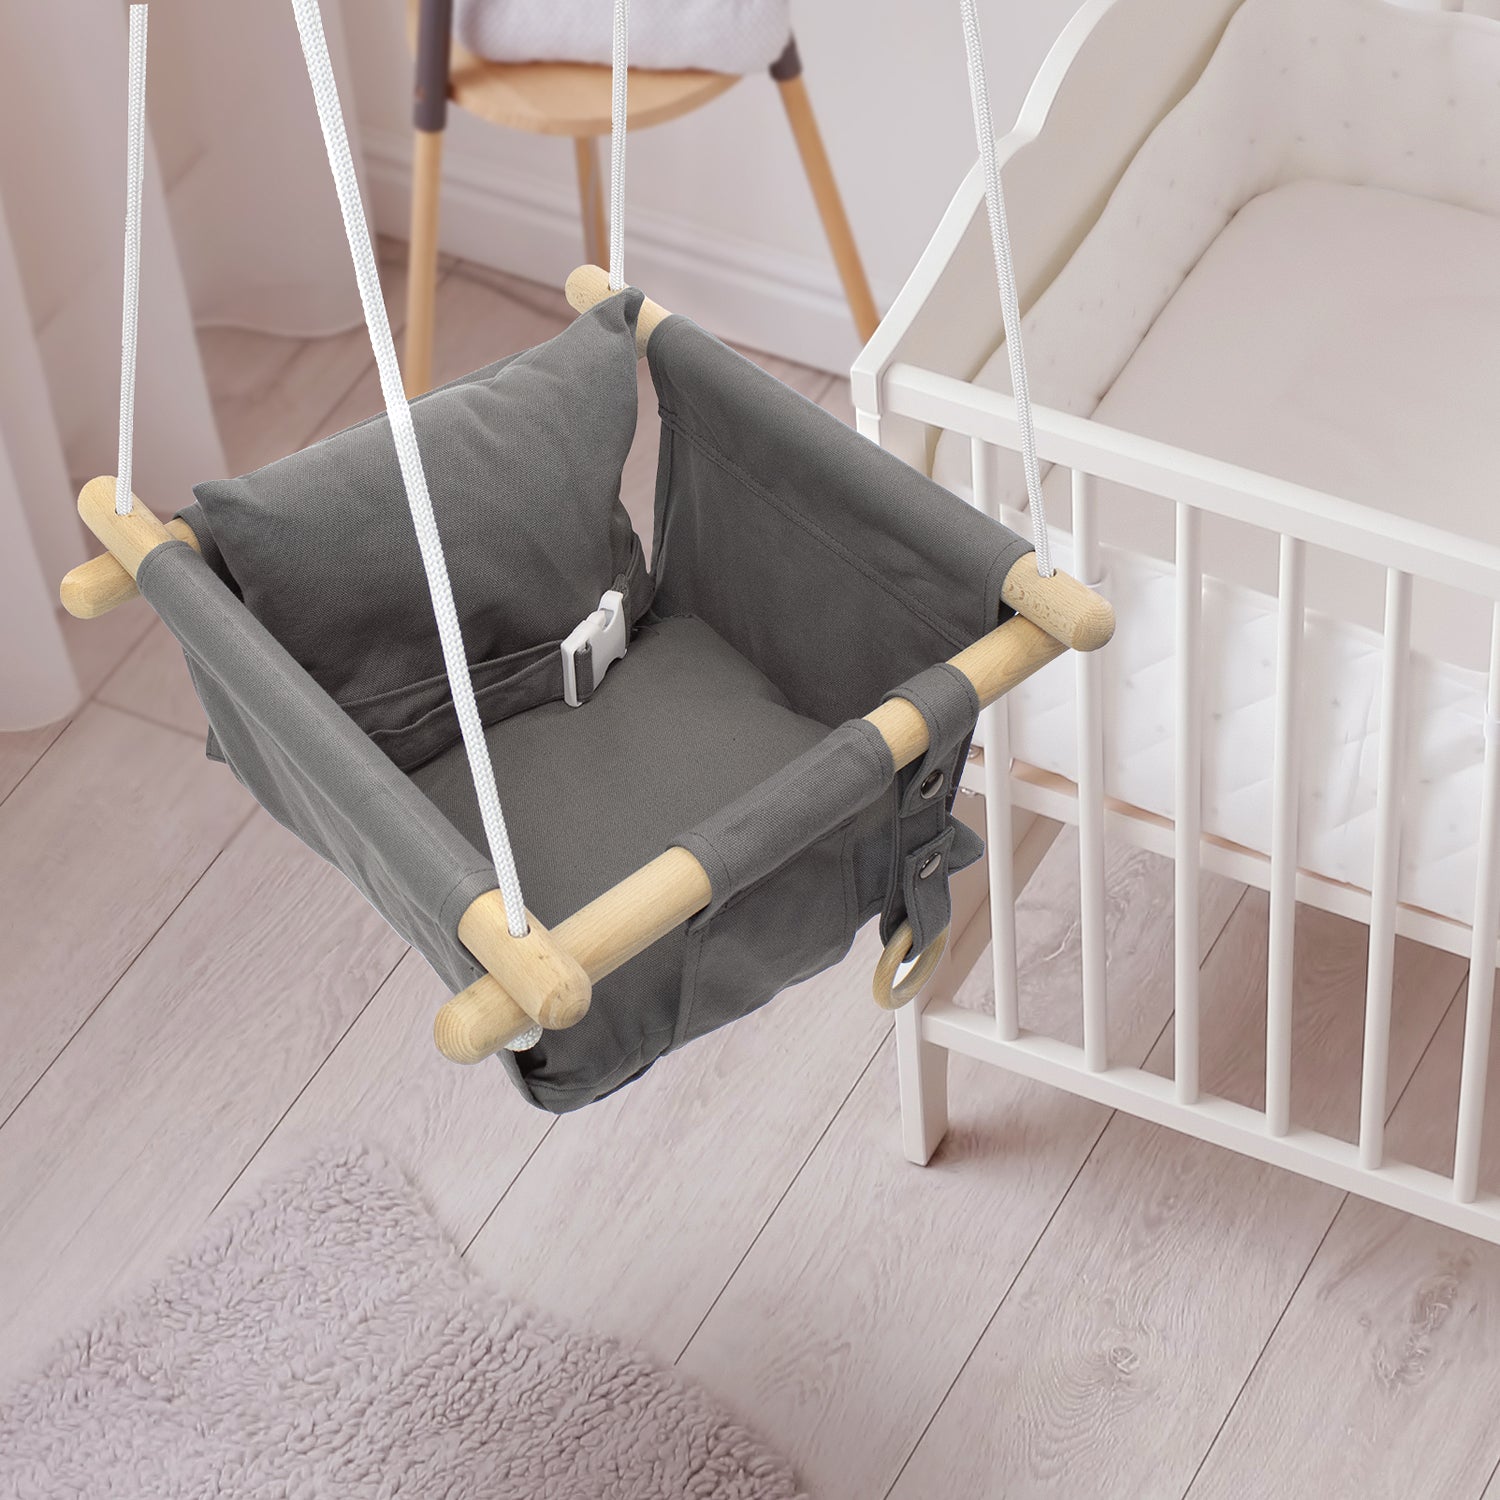 Sorbus Canvas Baby Swing Seat for Outdoor and Indoor Use